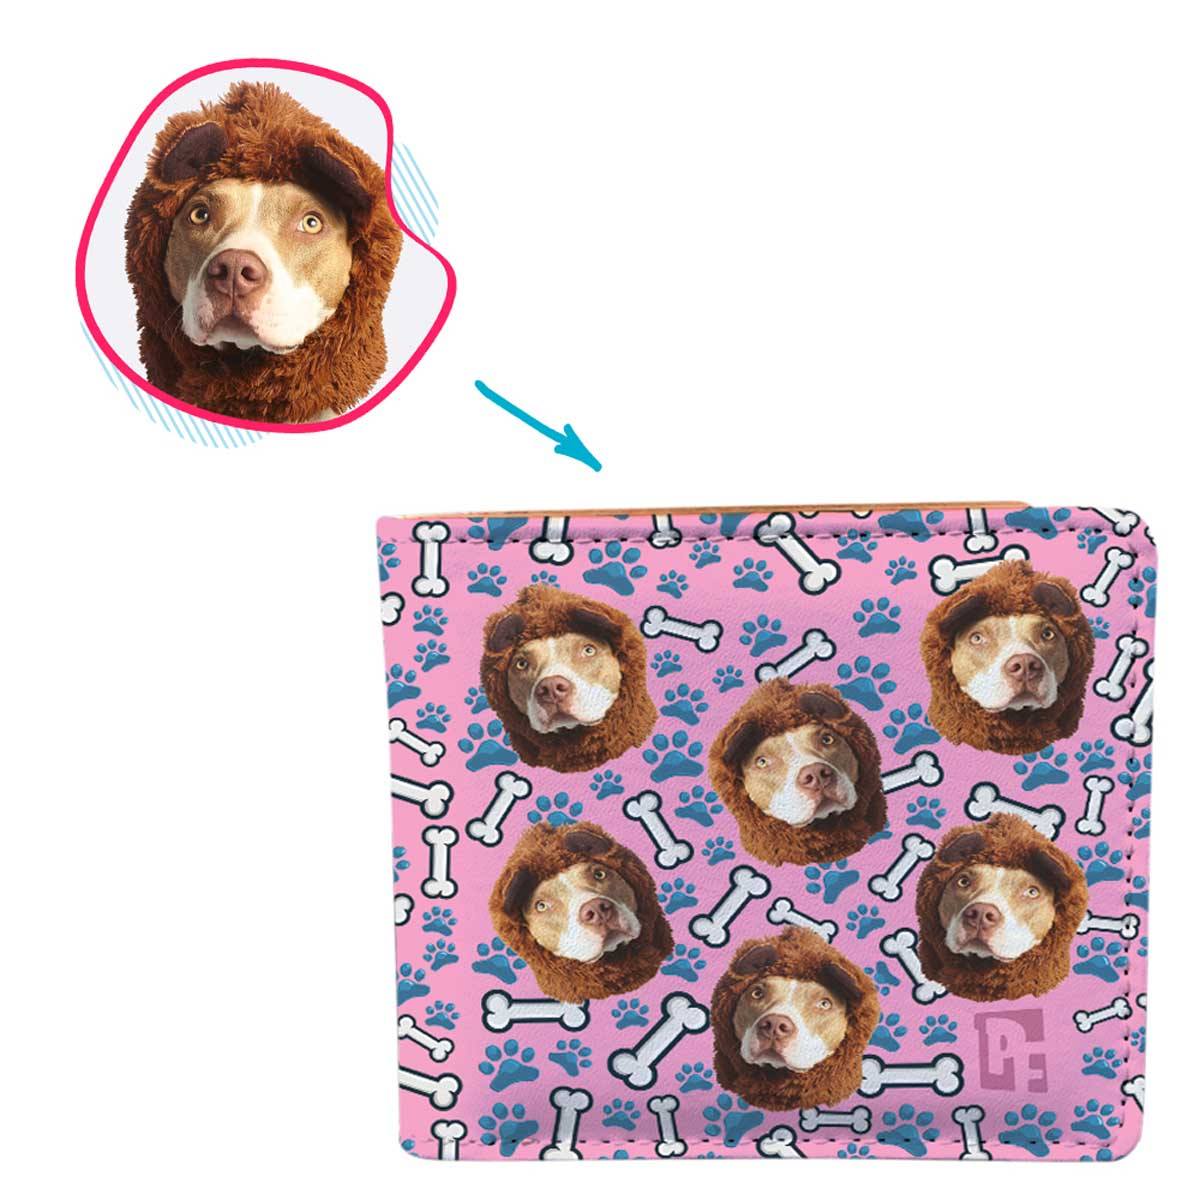 pink Dog wallet personalized with photo of face printed on it